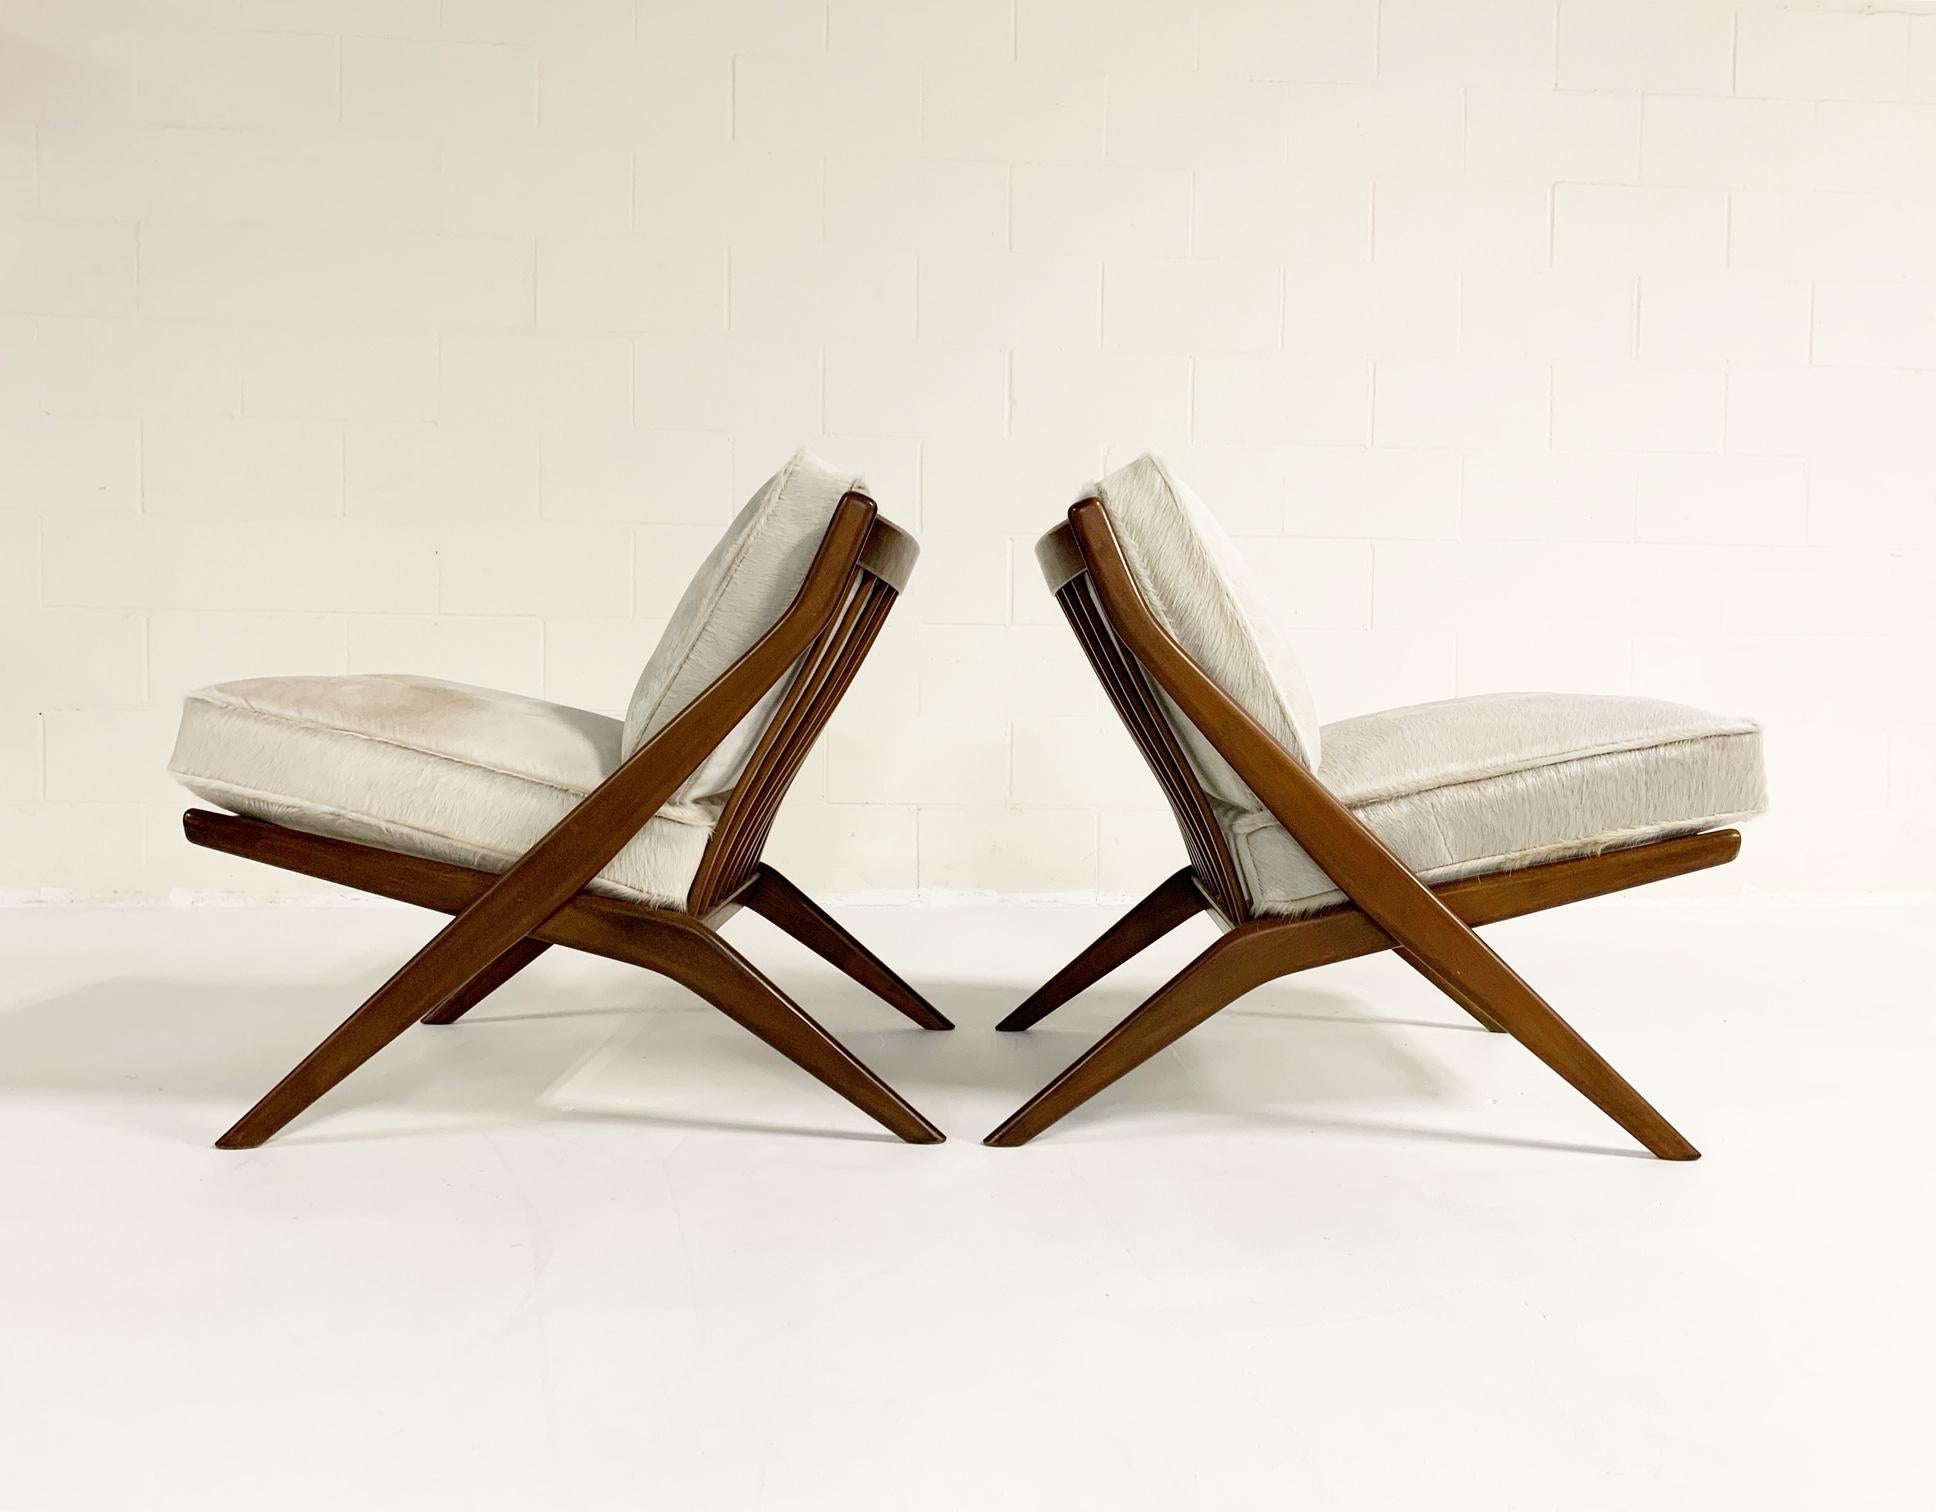 A pair of very cool lounge chairs designed by Folke Ohlsson for DUX of Sweden, circa 1950s. Featuring a solid walnut wood frame, providing exceptional comfort. Both cushions are brand new, 100% feather-filled, crafted from our luxurious ivory